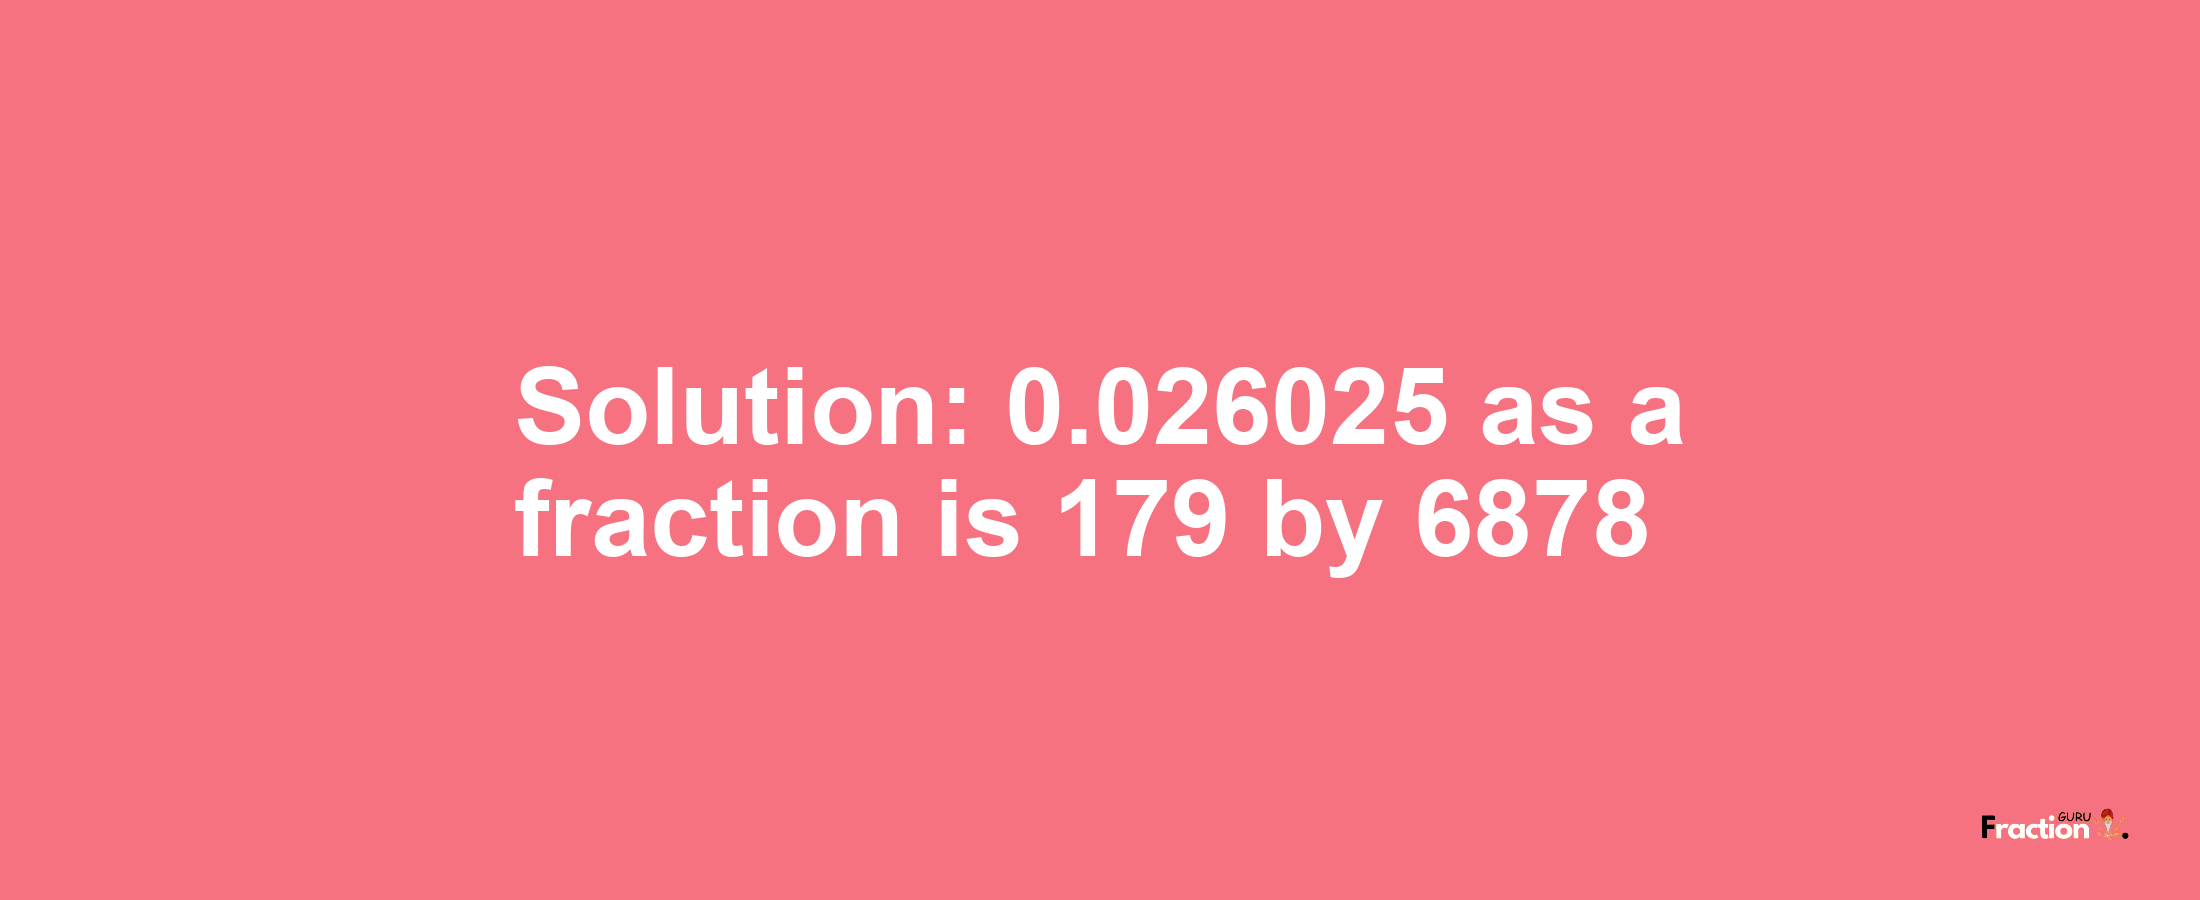 Solution:0.026025 as a fraction is 179/6878